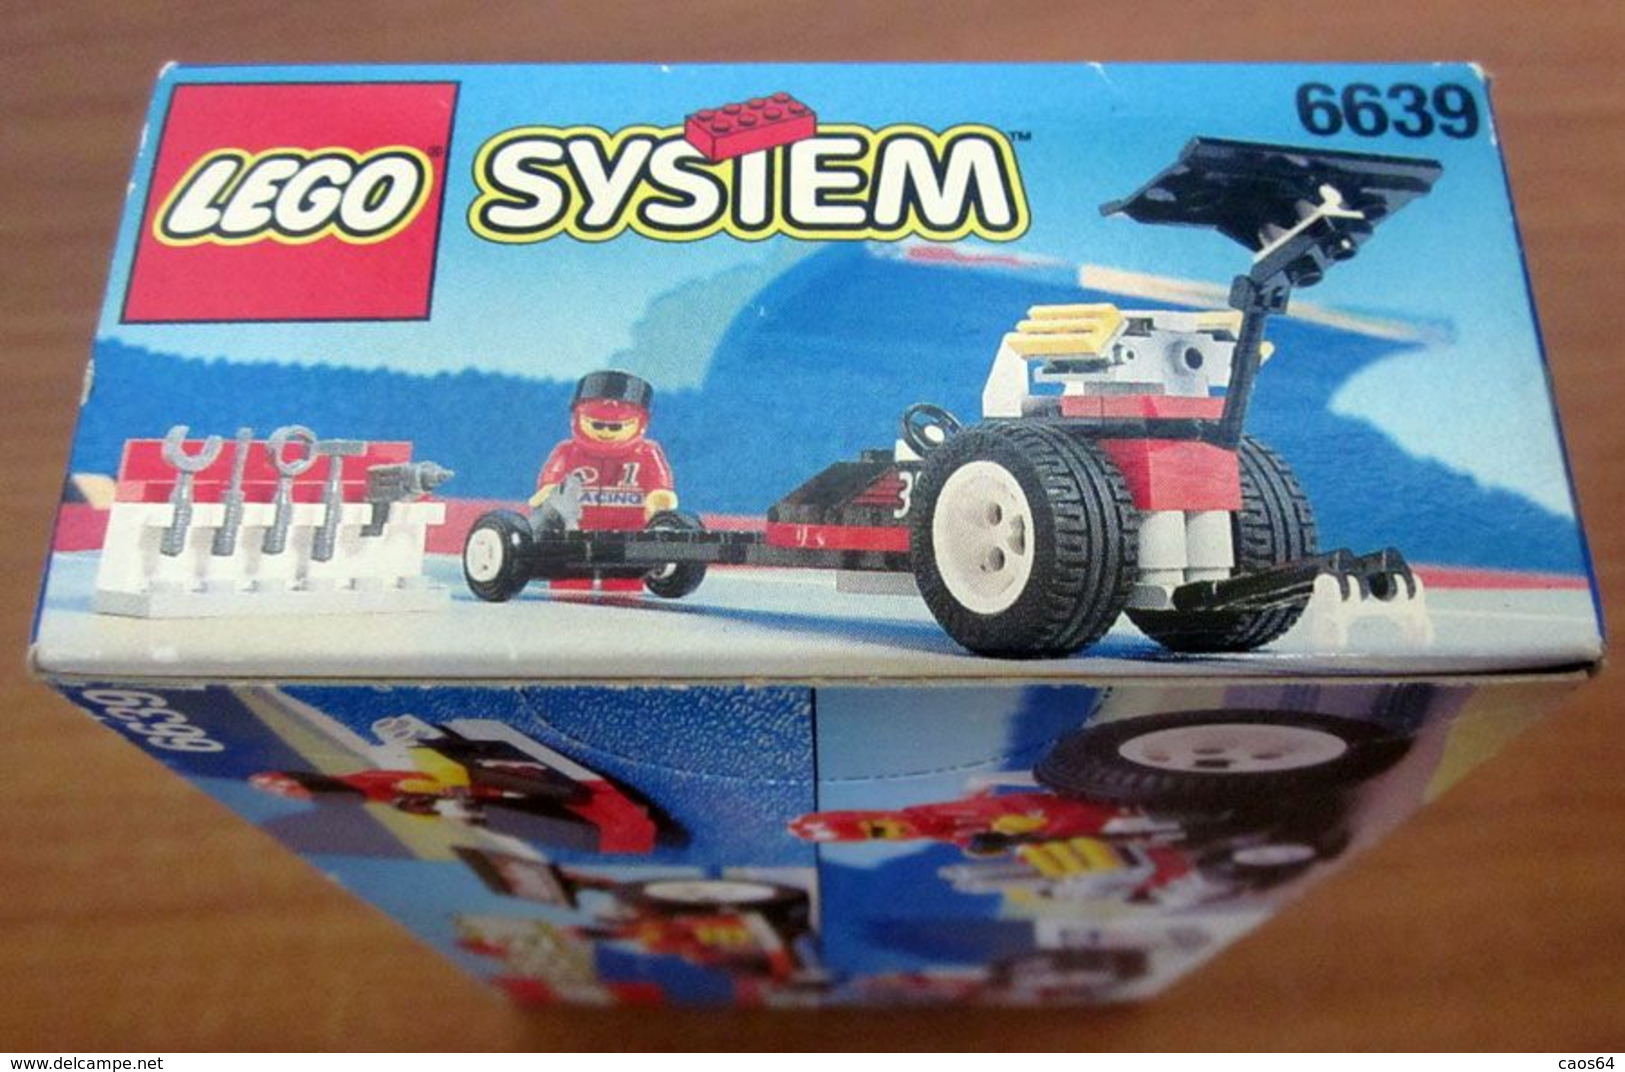 LEGO SYSTEM DRAGSTER 6639  NUOVO 1995  NEW - Lego System